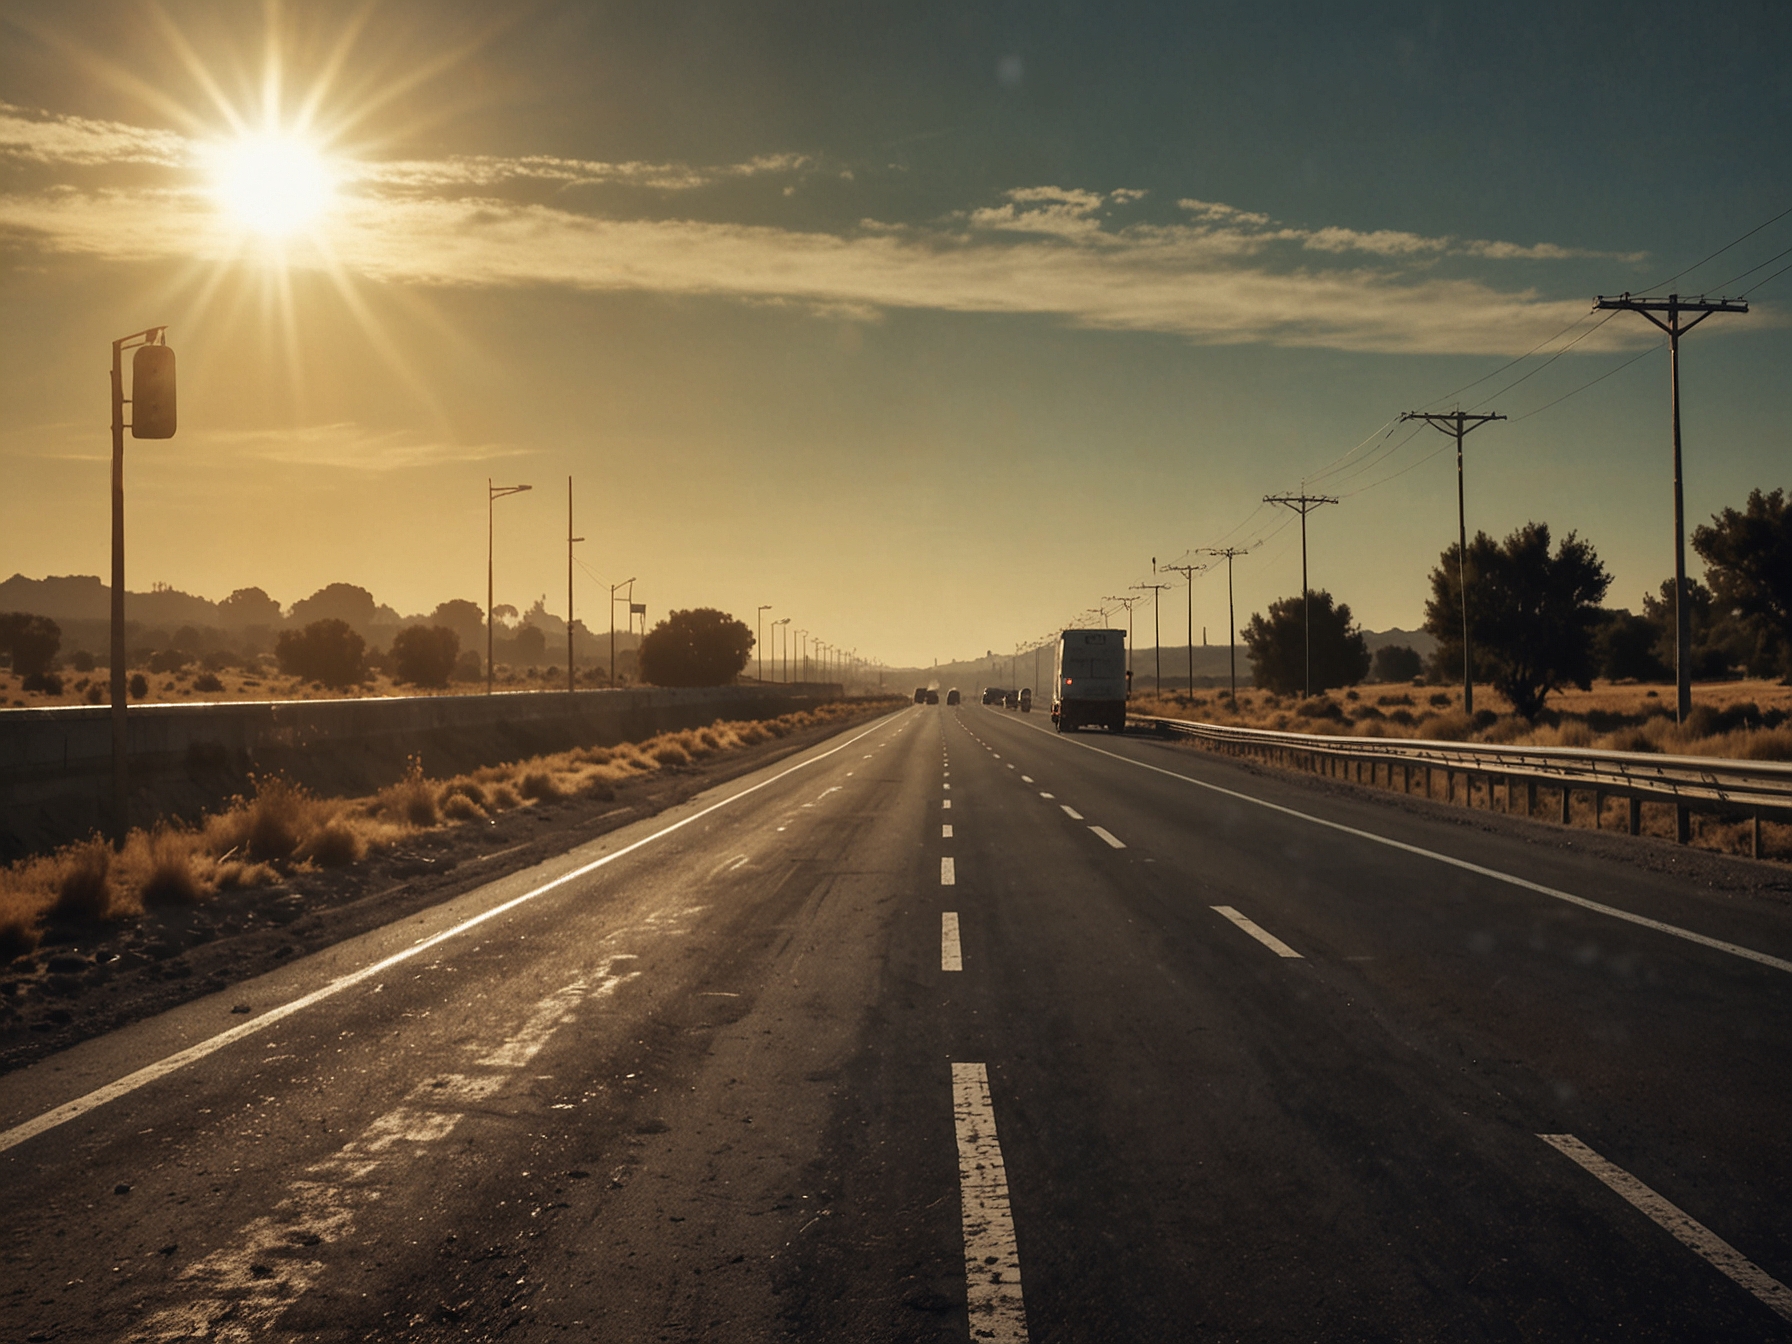 A deserted highway with minimal traffic under a scorching sun, illustrating the decline in long-haul commercial transportation due to extreme heat affecting diesel demand.